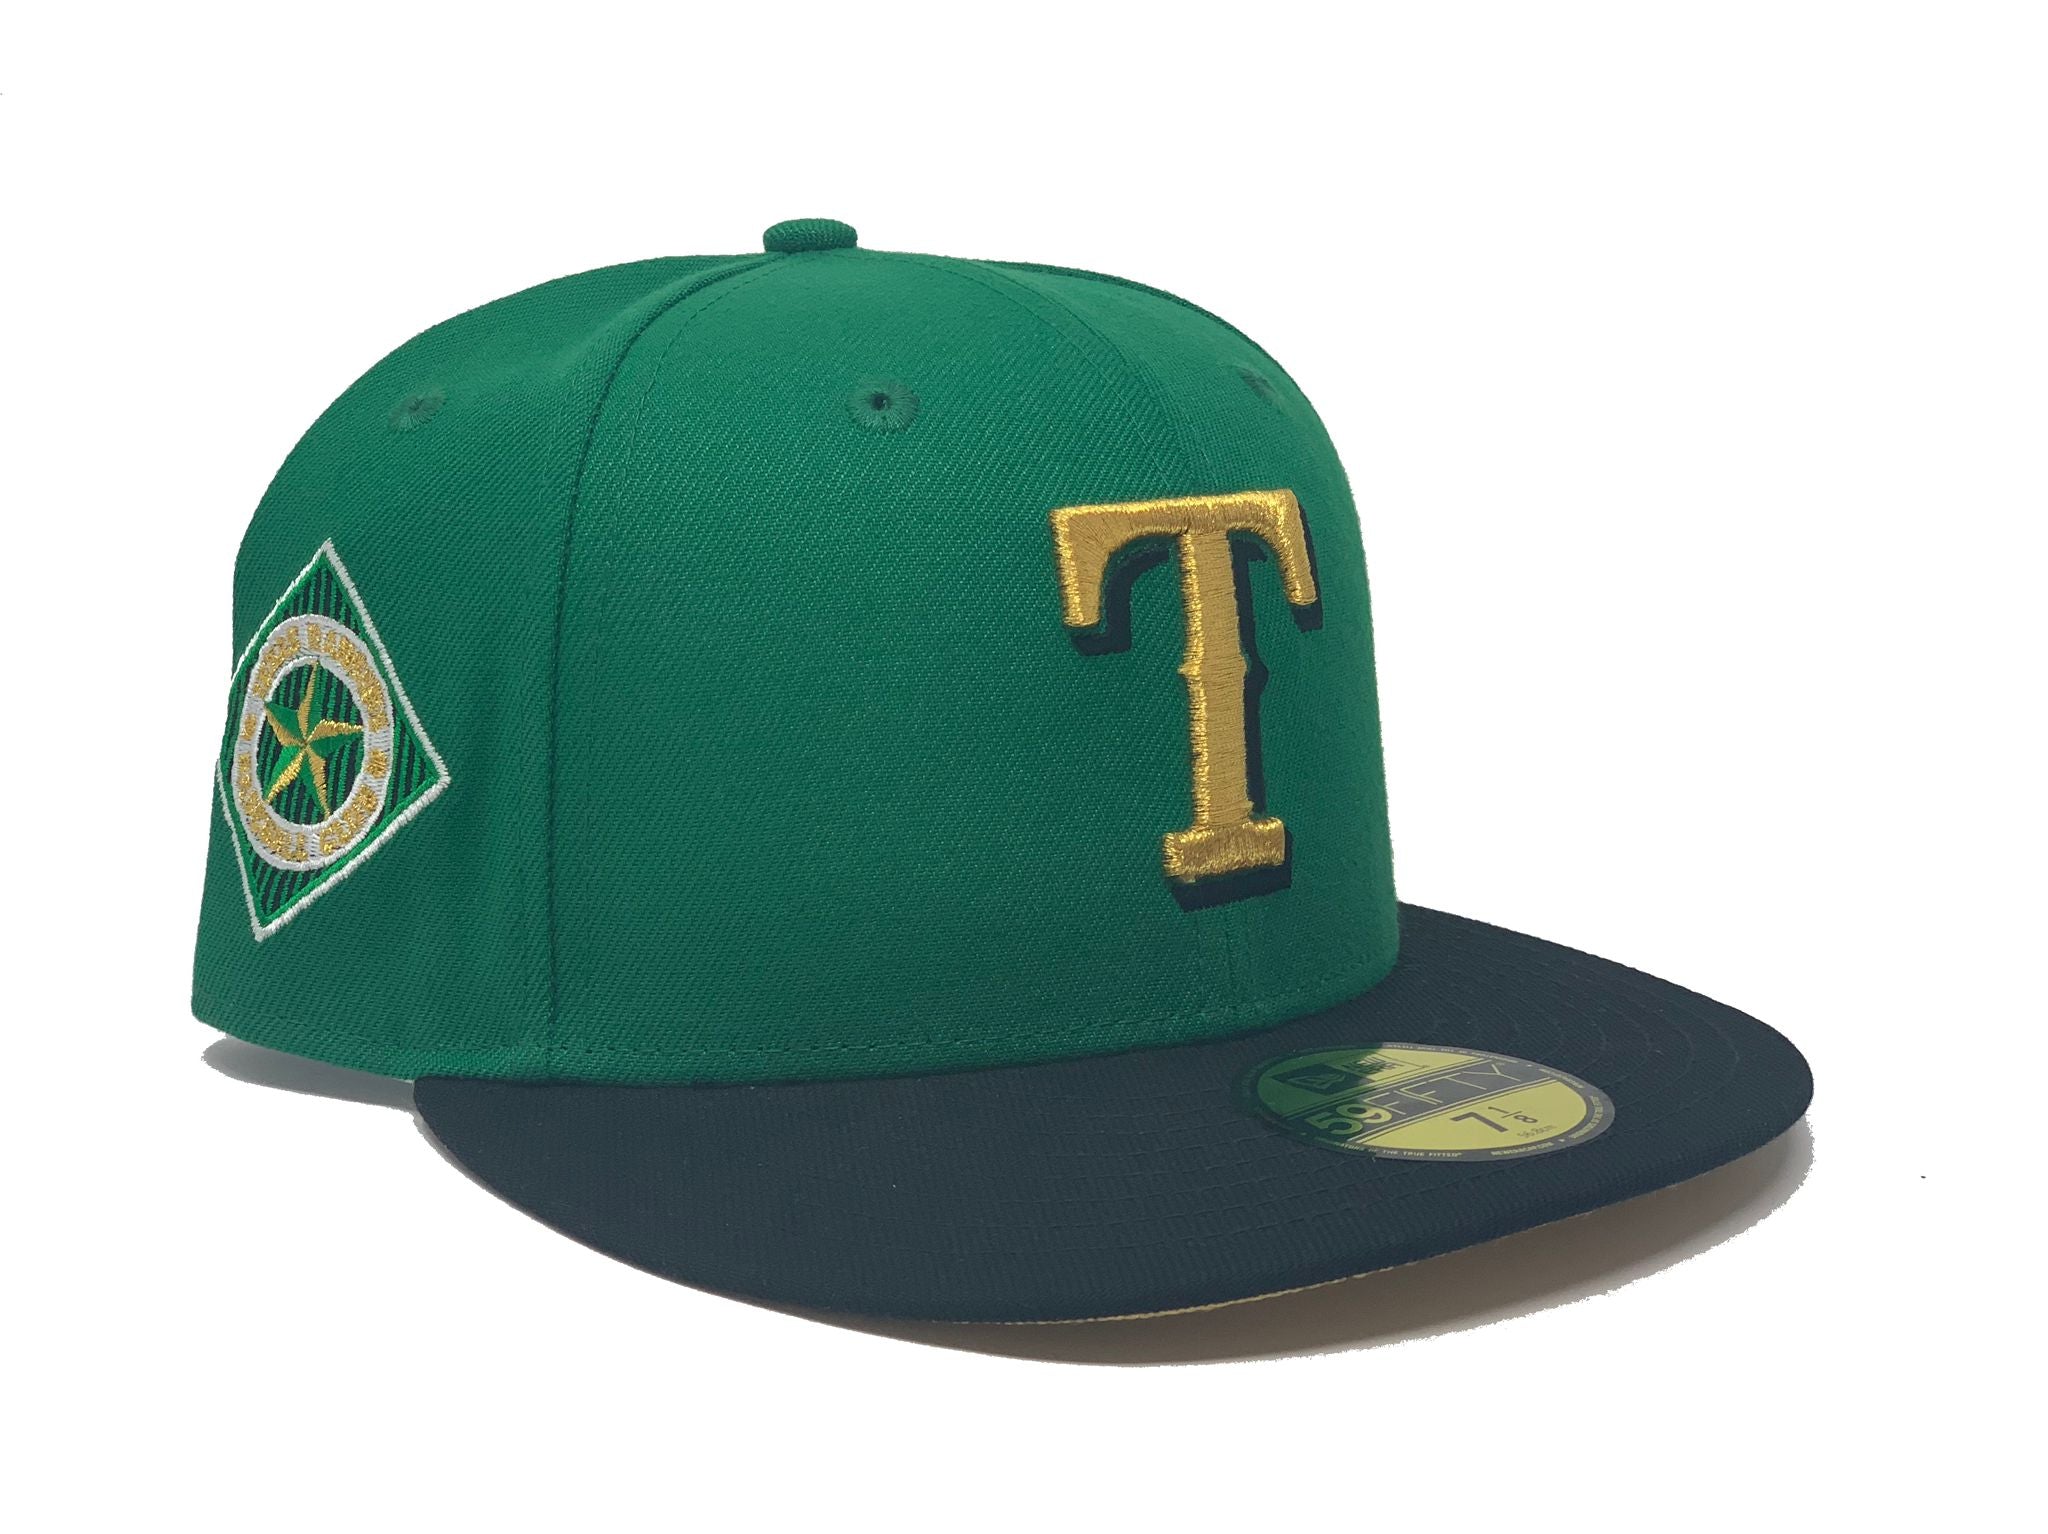 Texas Rangers Mitchell & Ness Fitted Homefield Coop Cap Hat Green